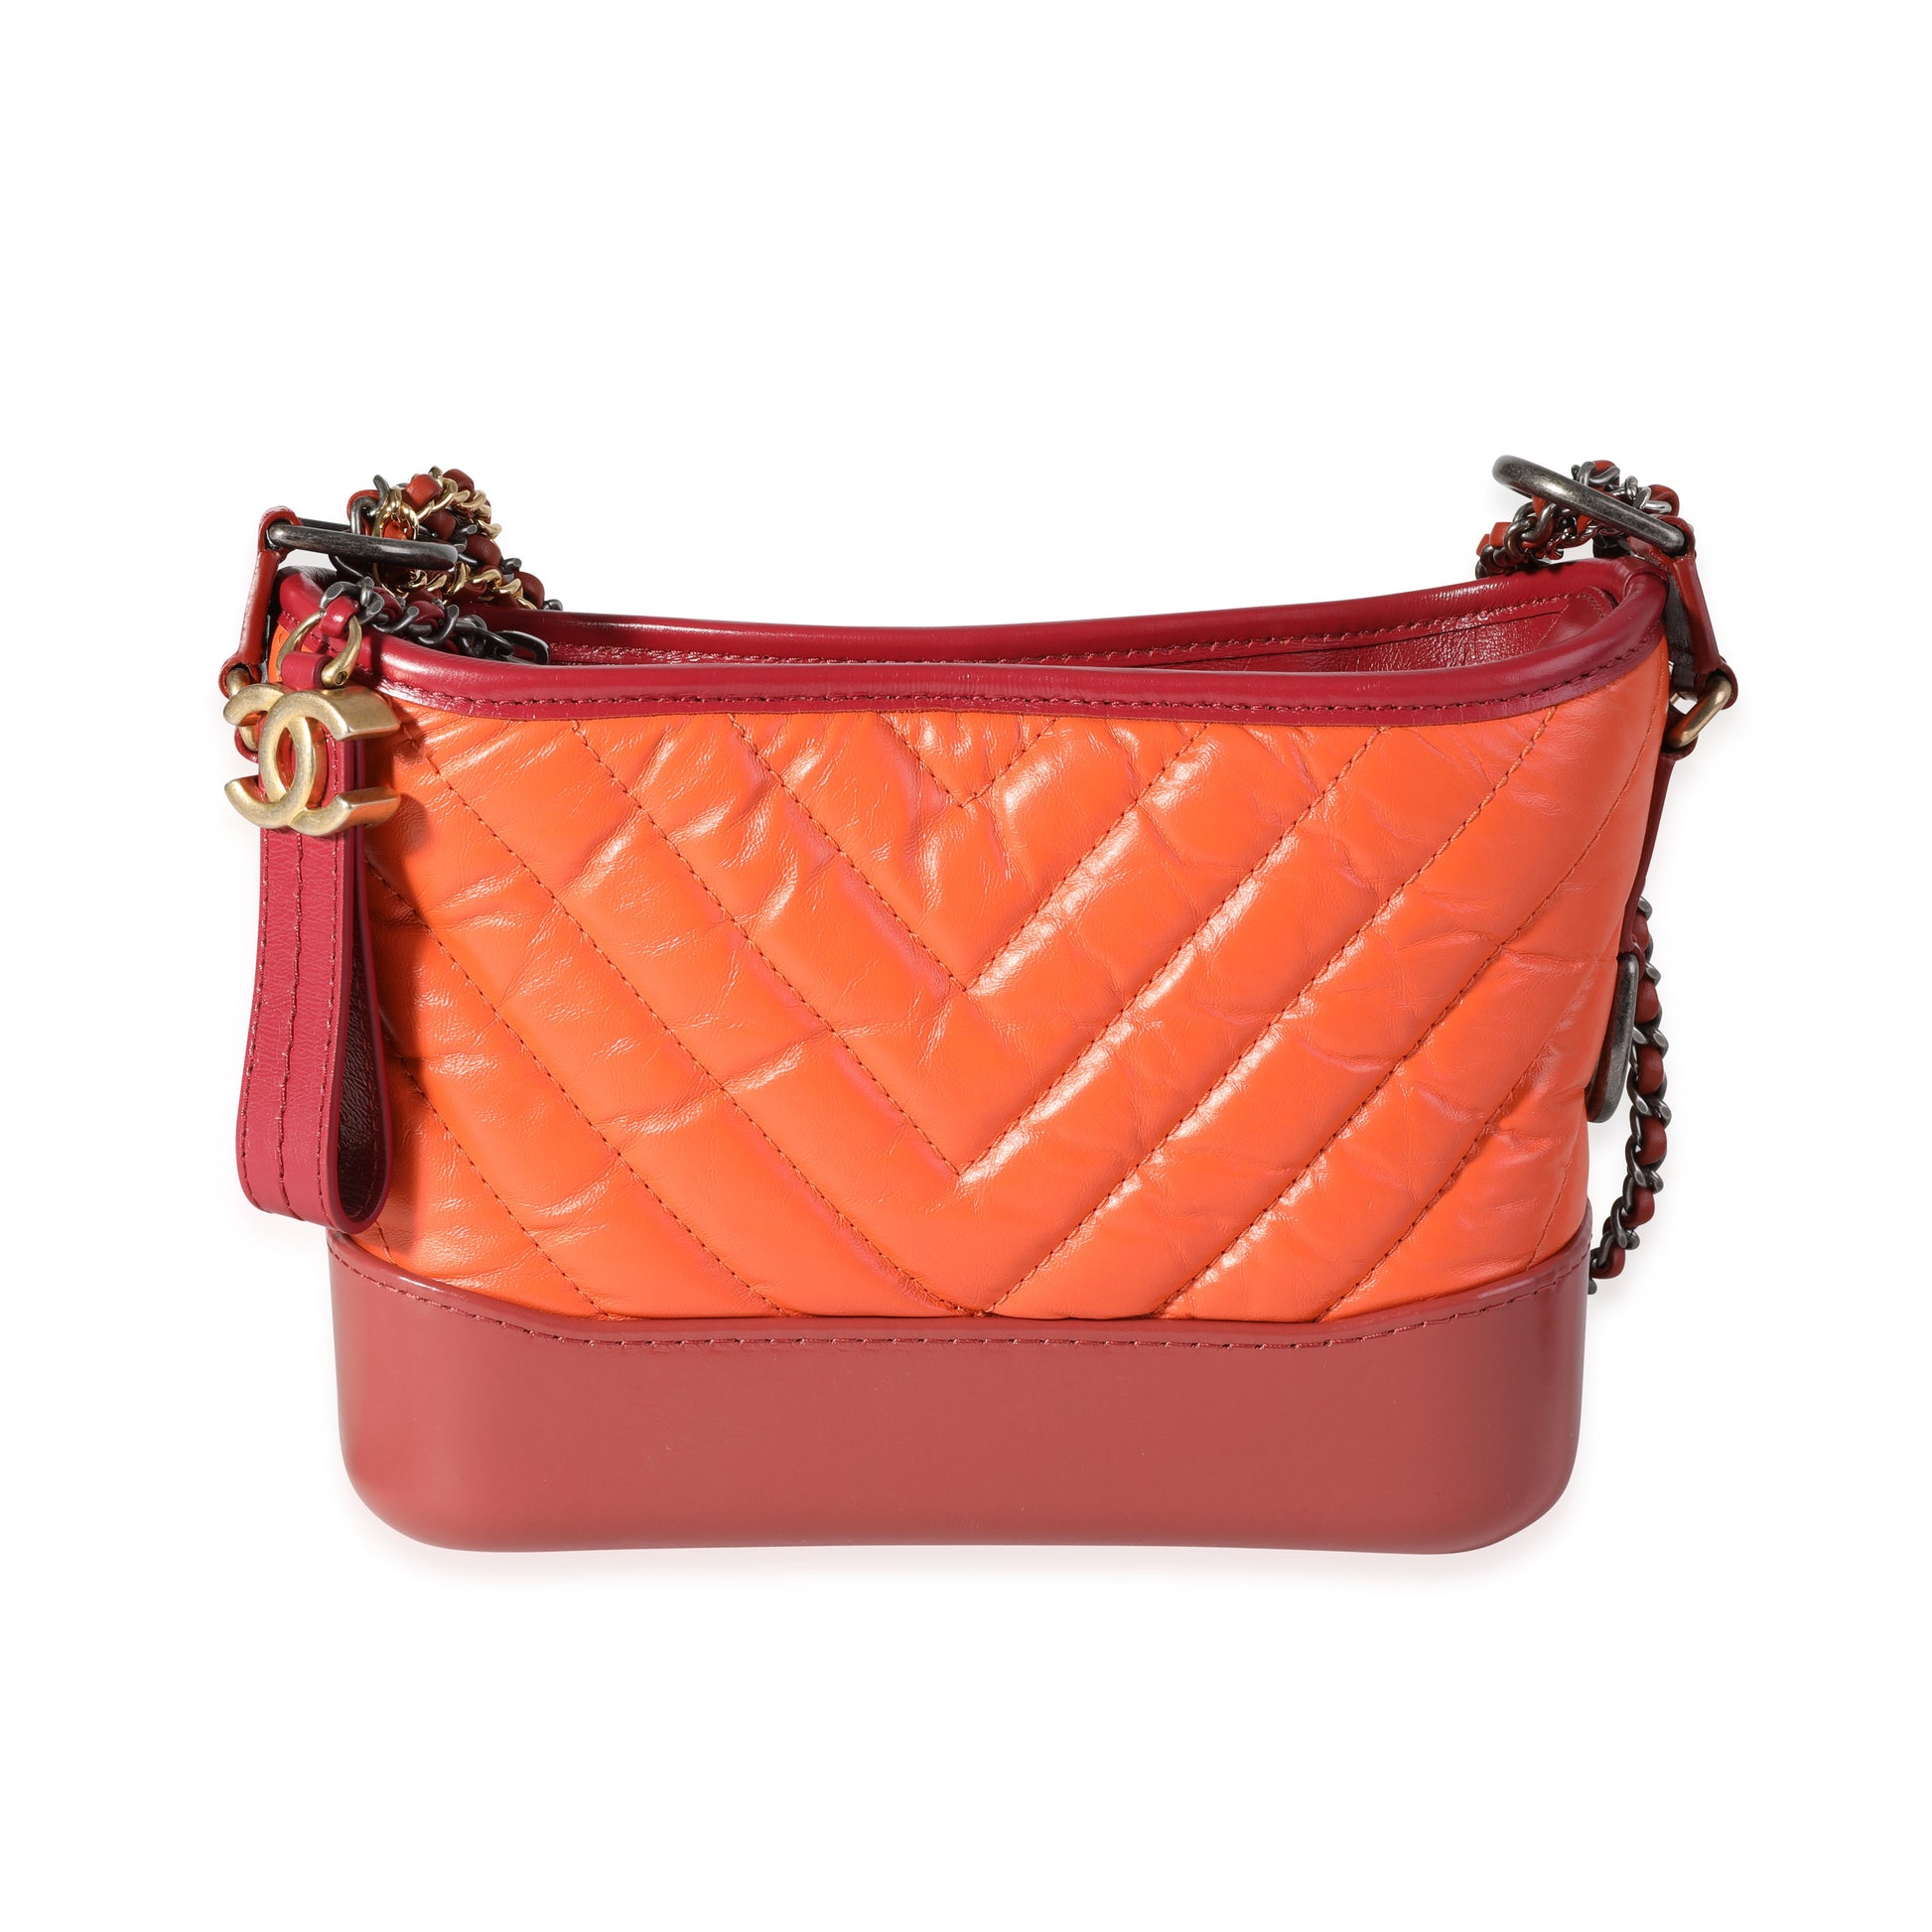 CHANEL Orange & Red Aged Calfskin Chevron Quilted Small